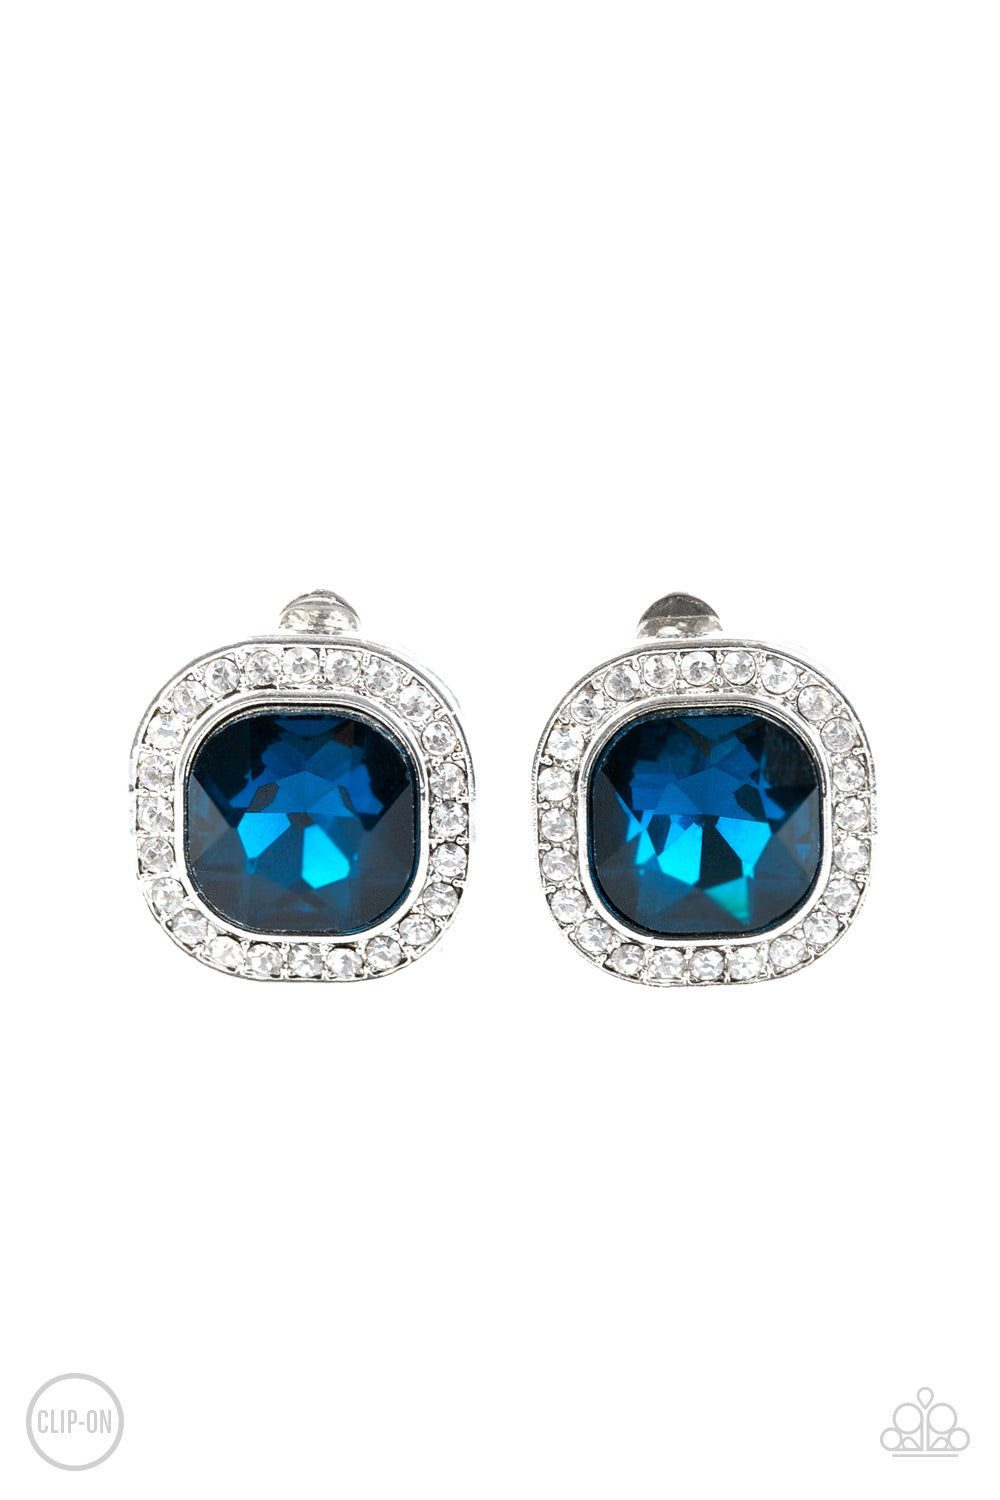 The Fame Game - blue - Paparazzi CLIP ON earrings – JewelryBlingThing